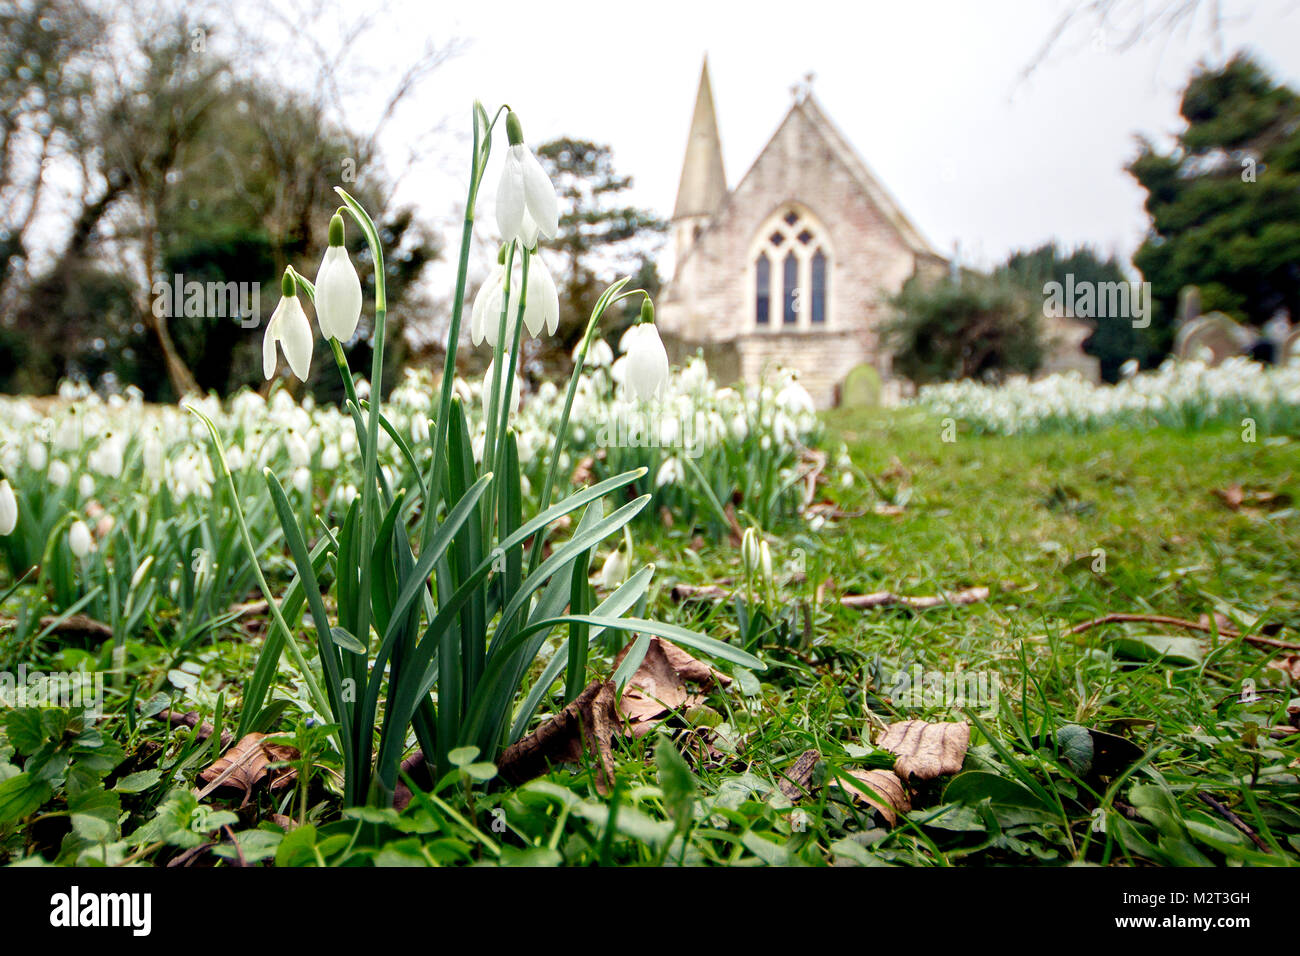 Edge, Gloucestershire, UK. 8th Feb, 2018. A carpet of snowdrops in full bloom at The Parish Church of St John the Baptist in Edge near Stroud, Gloucestershire. Picture: Carl Hewlett/Alamy Live News Stock Photo